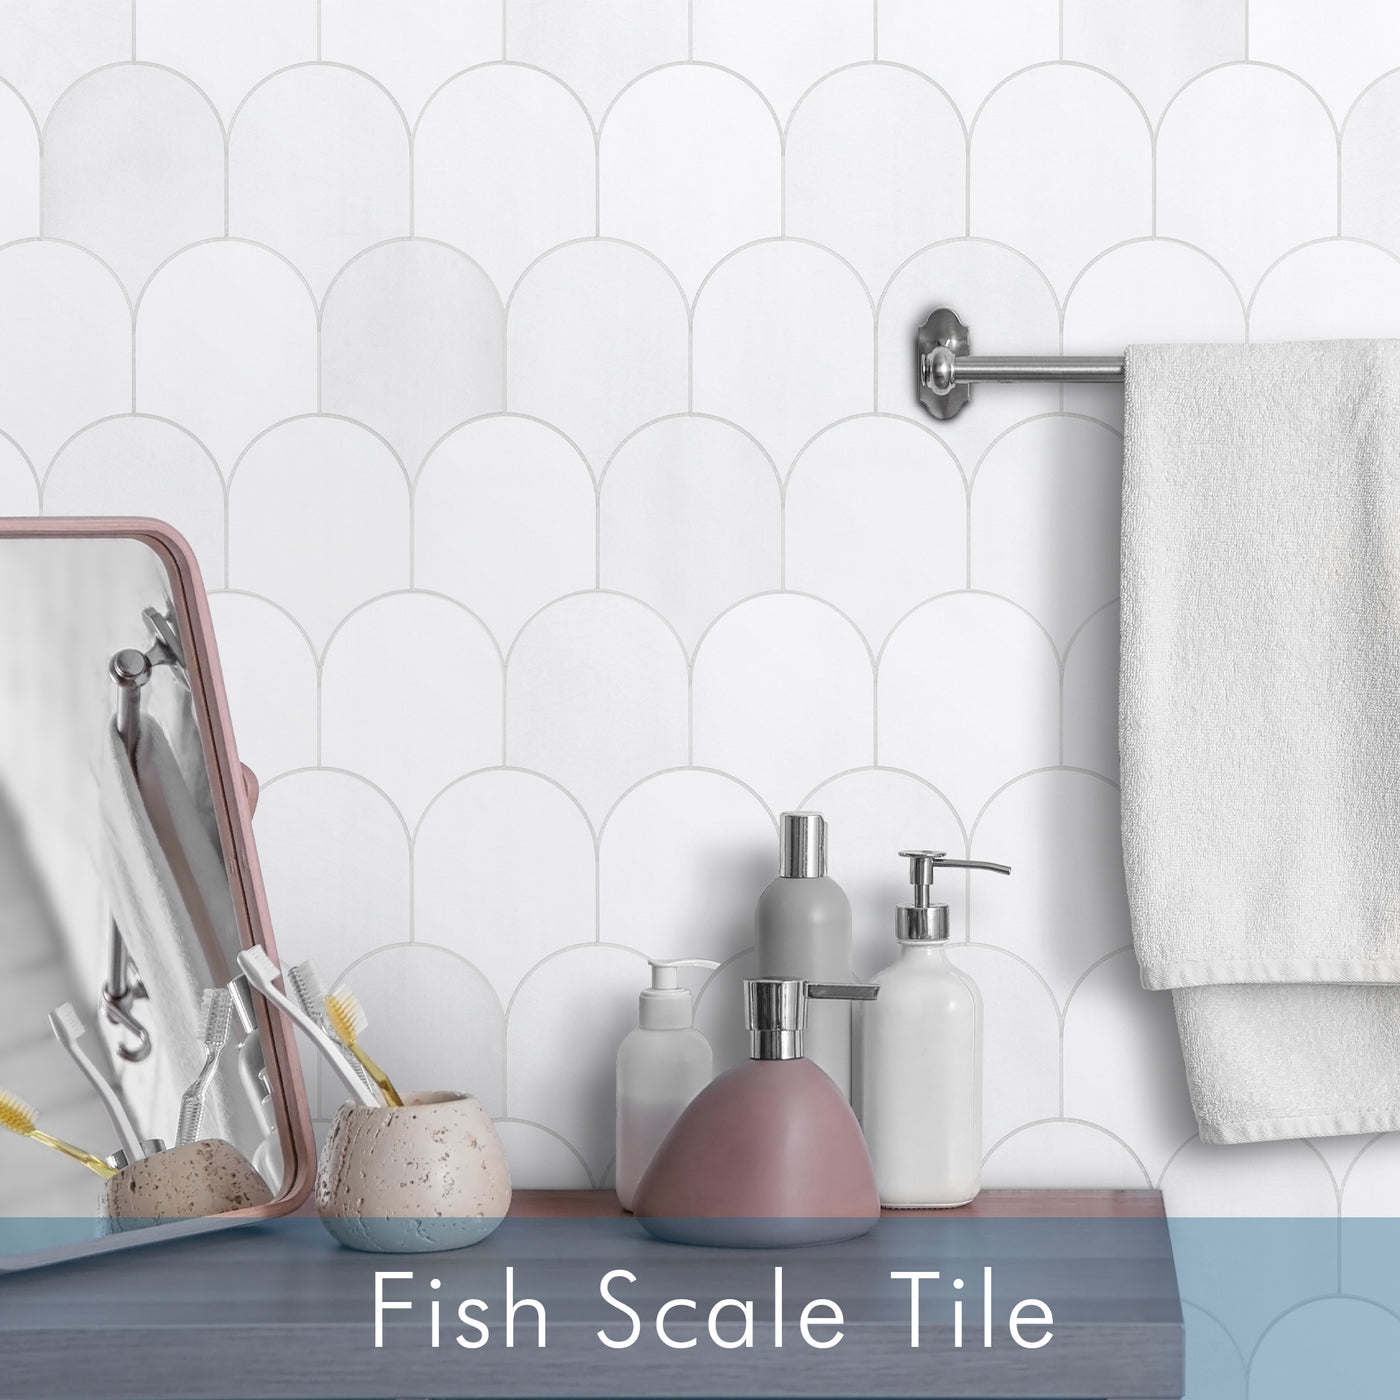 Fish Scale Tile